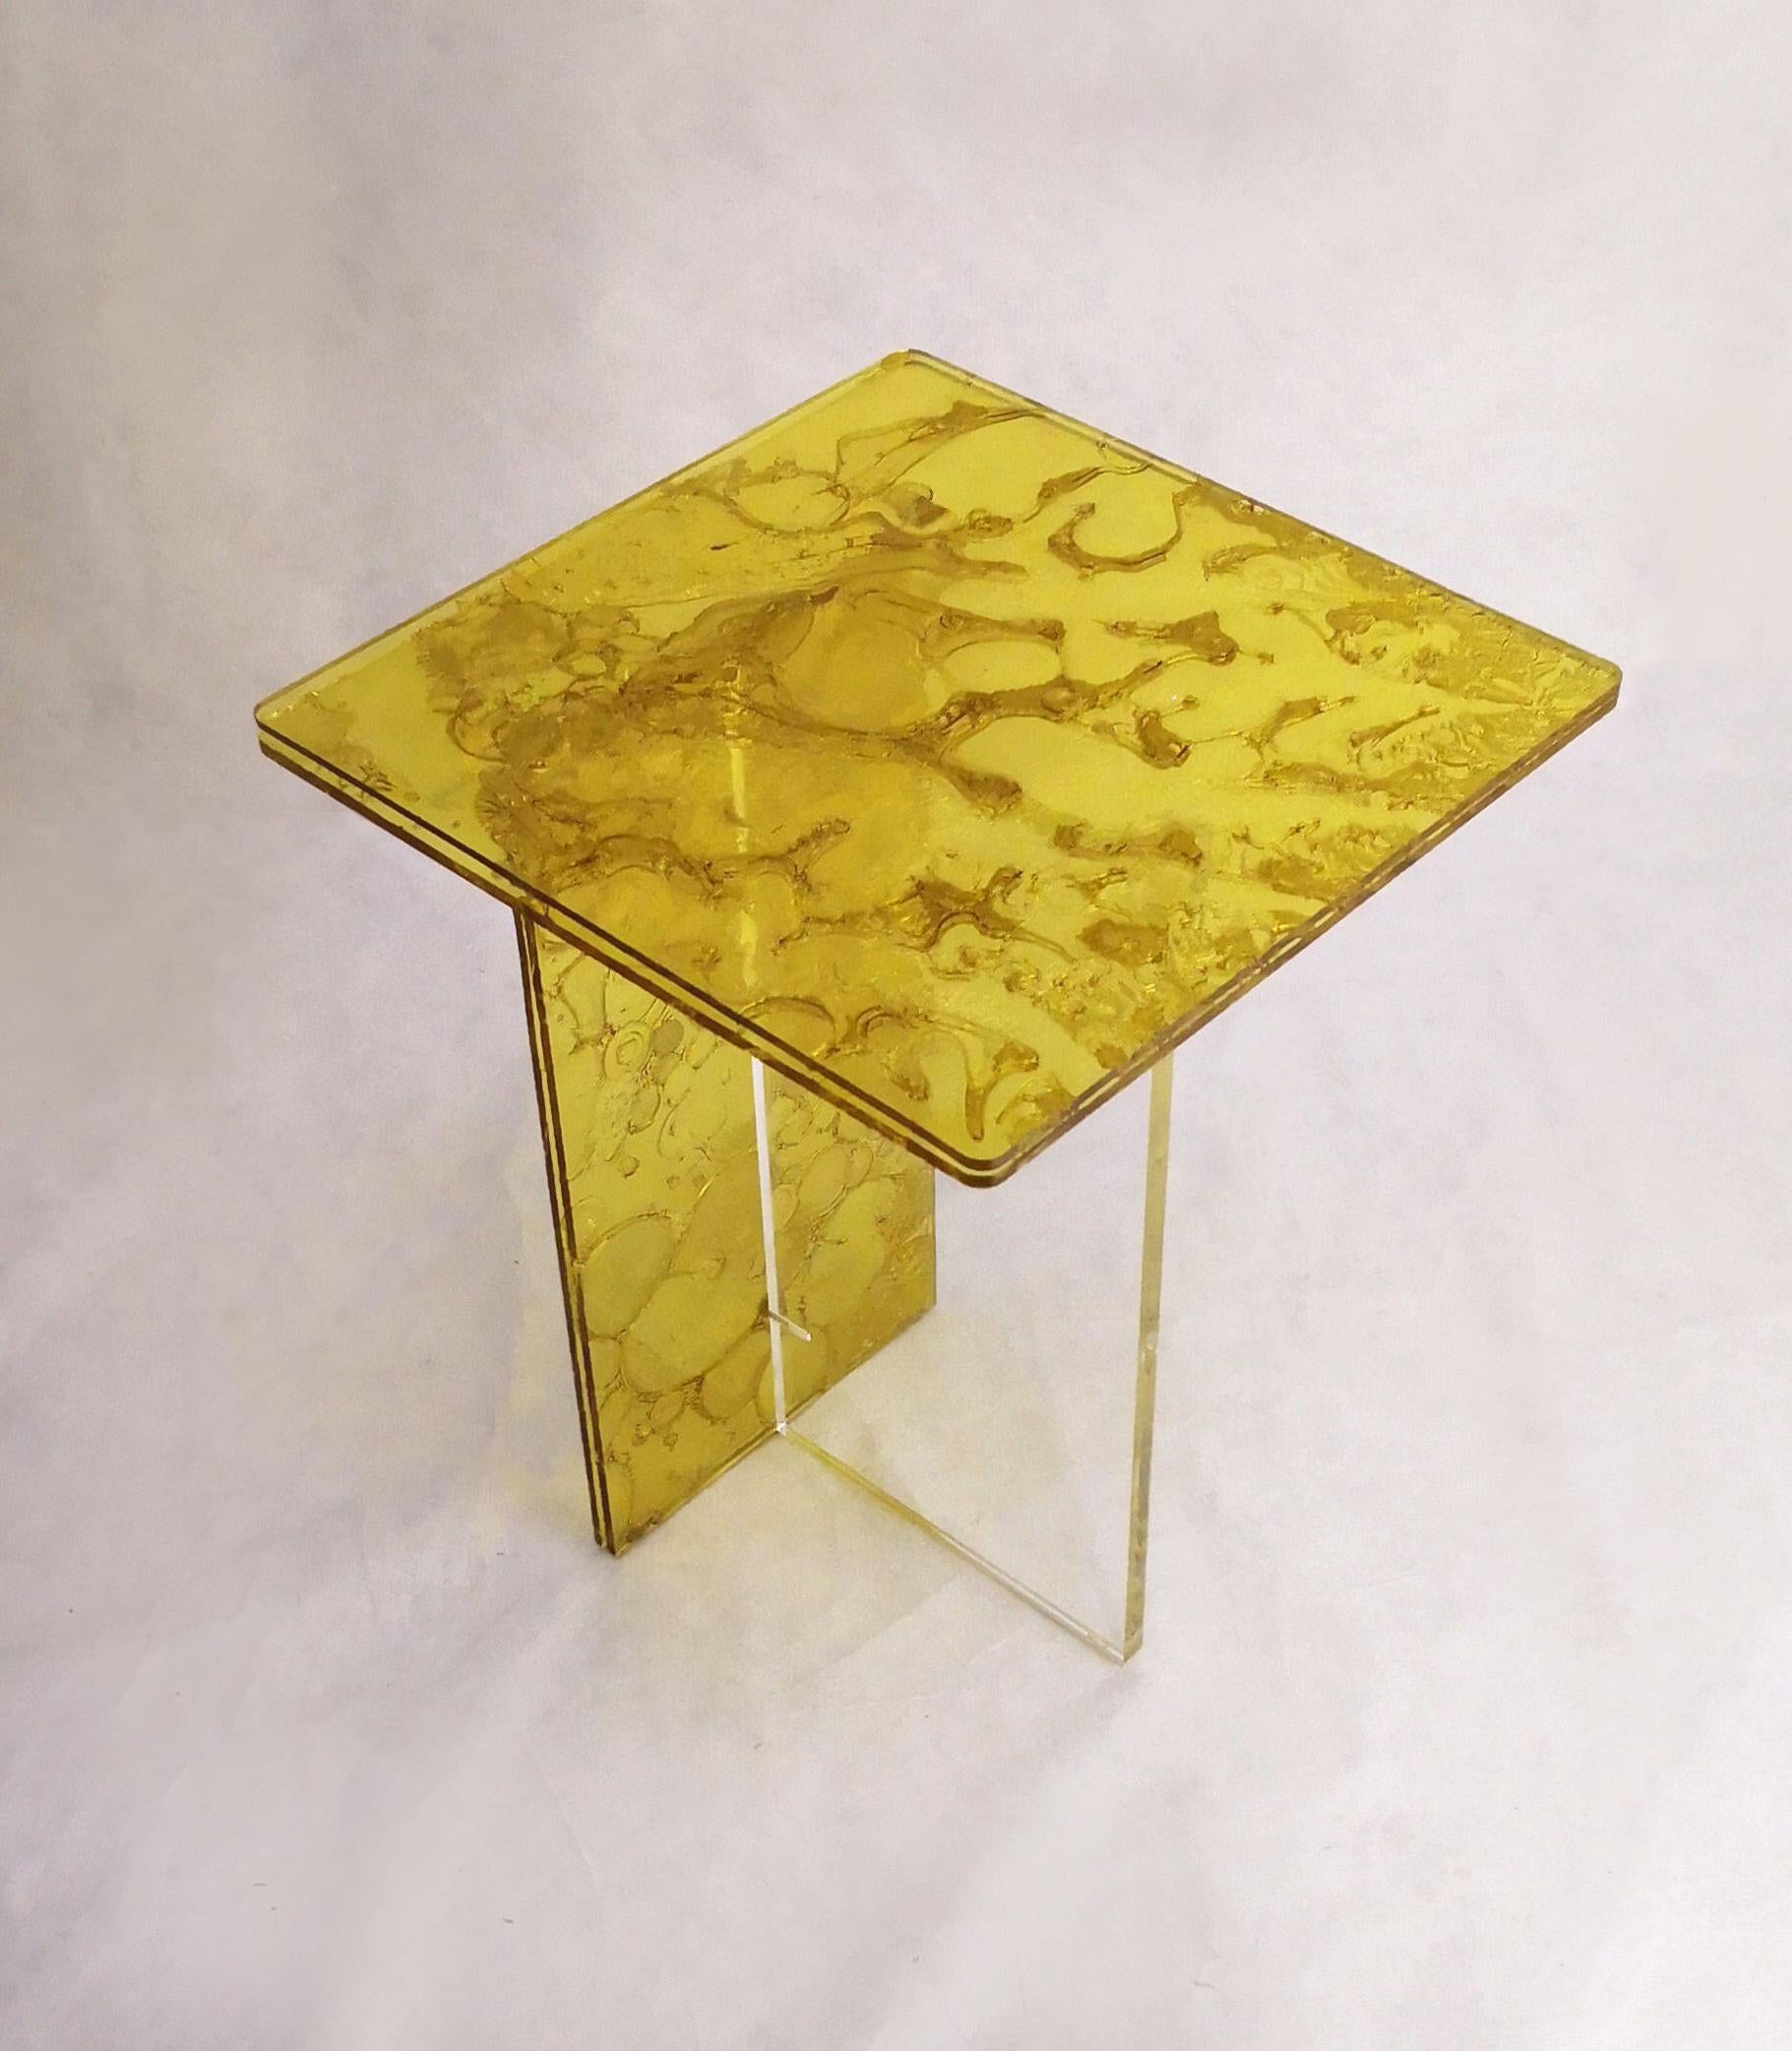 Italian Sketch Mini Sidetable Made of Yellow Acrylic Des. Roberto Giacomucci in 2022 For Sale